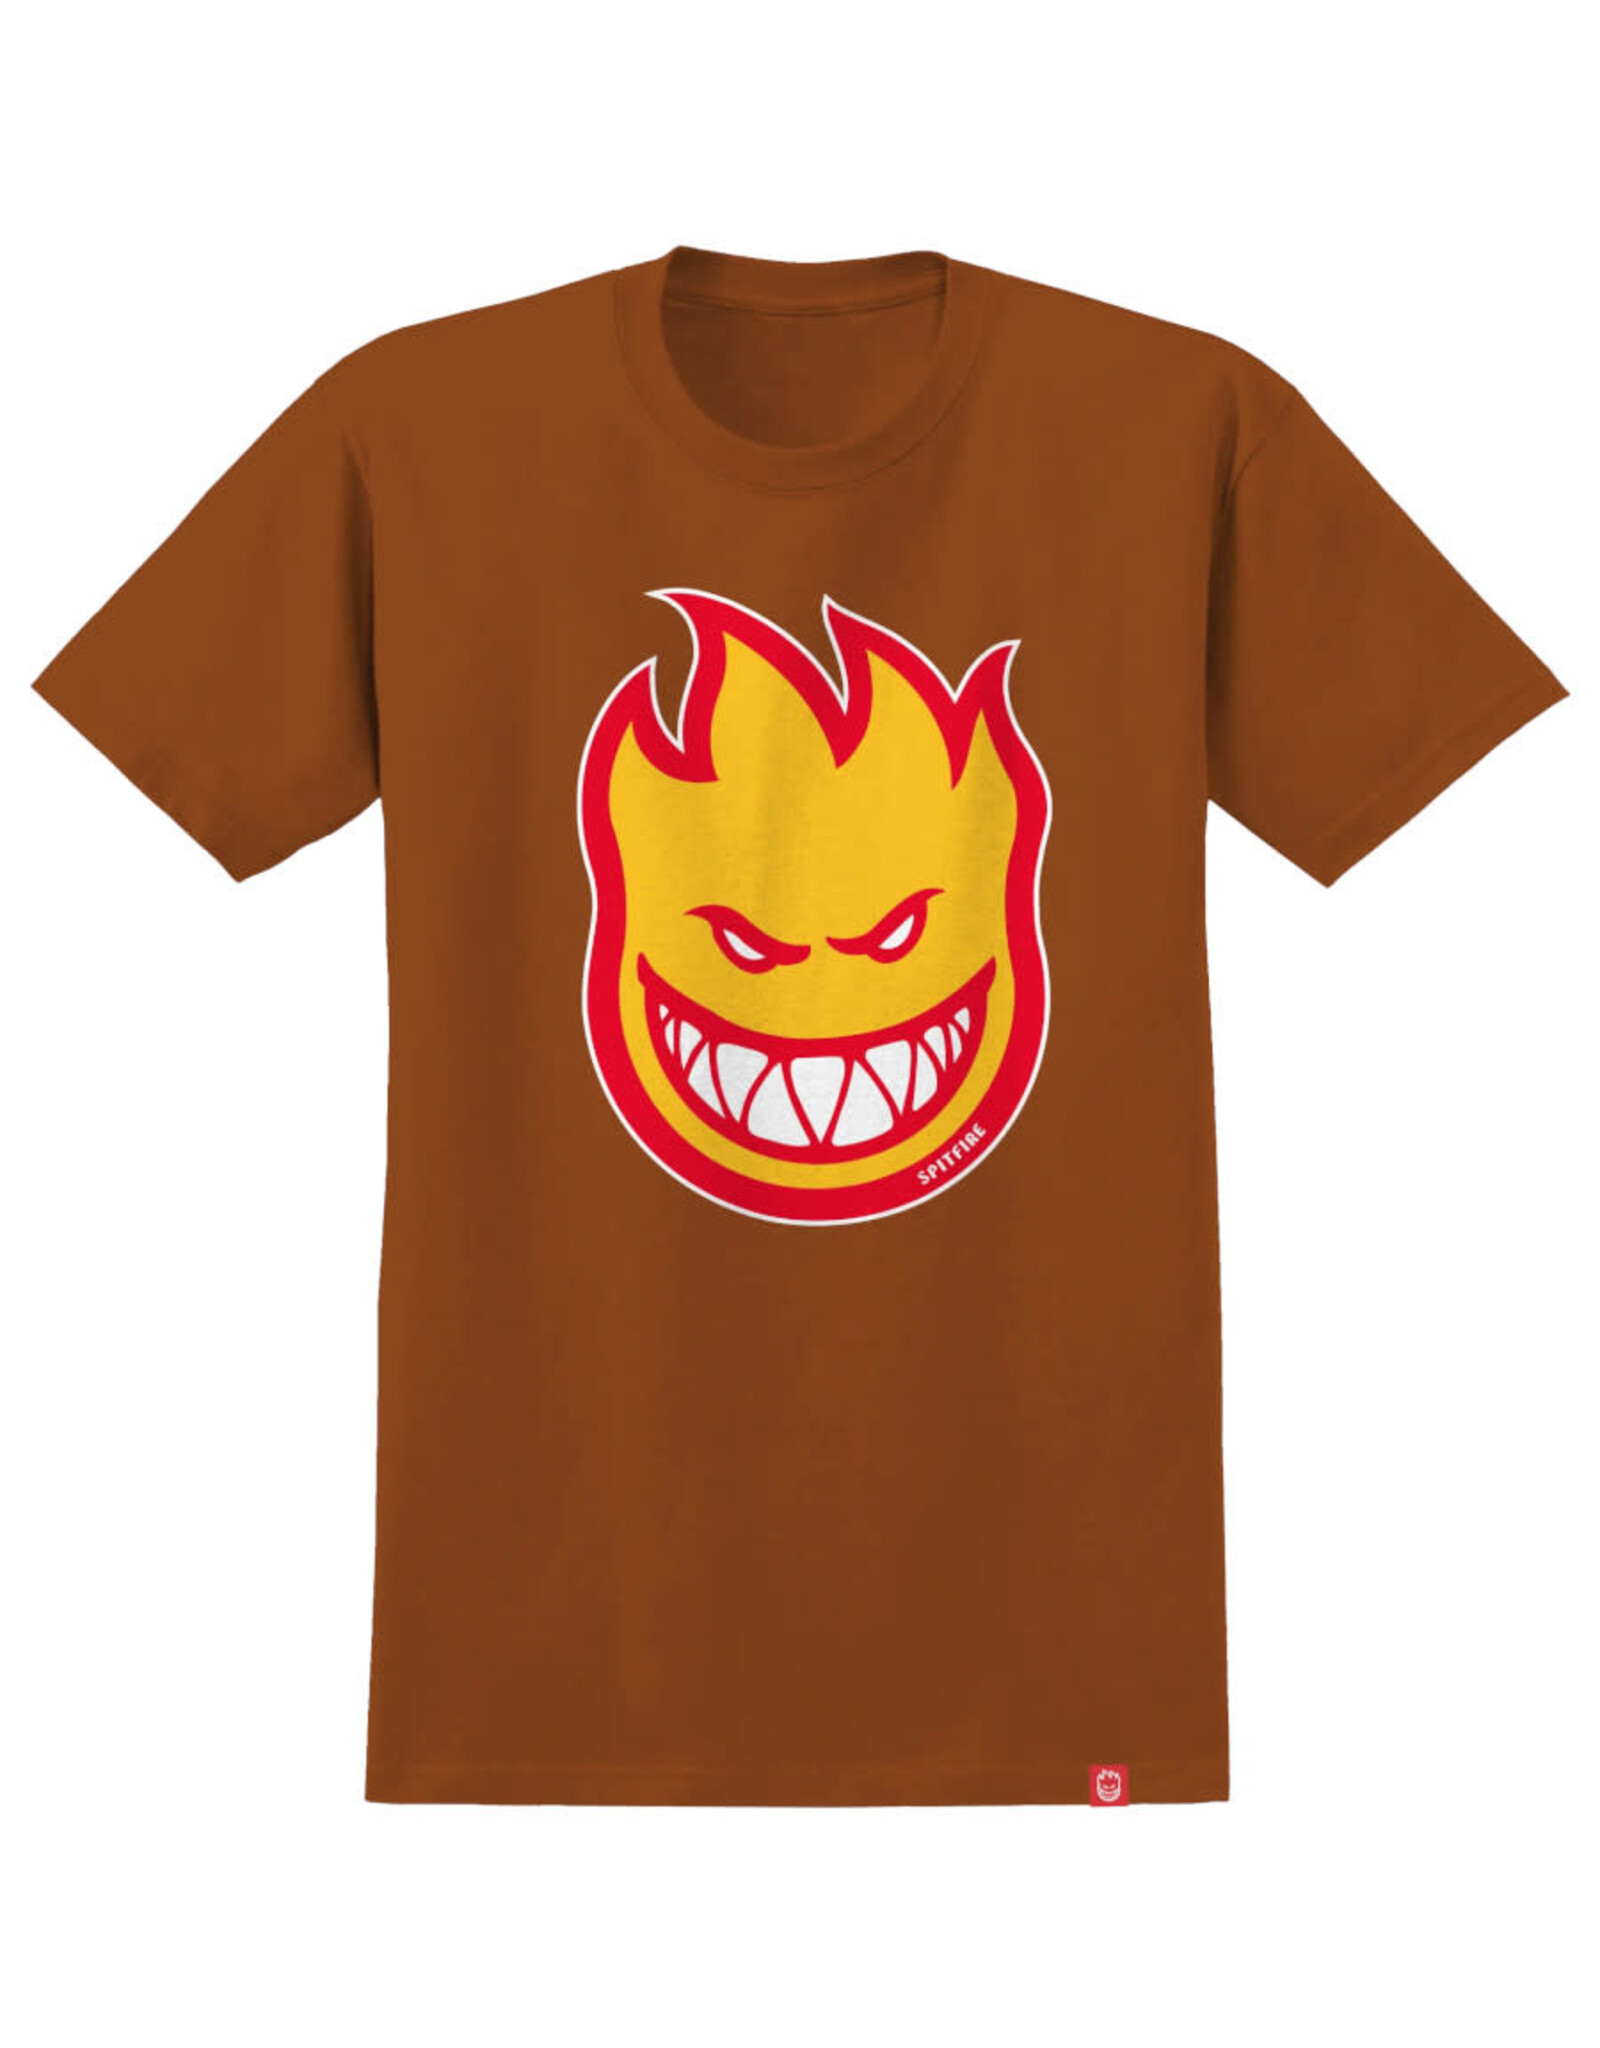 Spitfire Spitfire Tee Bighead Fill Youth S/S (Texas Orange/Gold/Red)